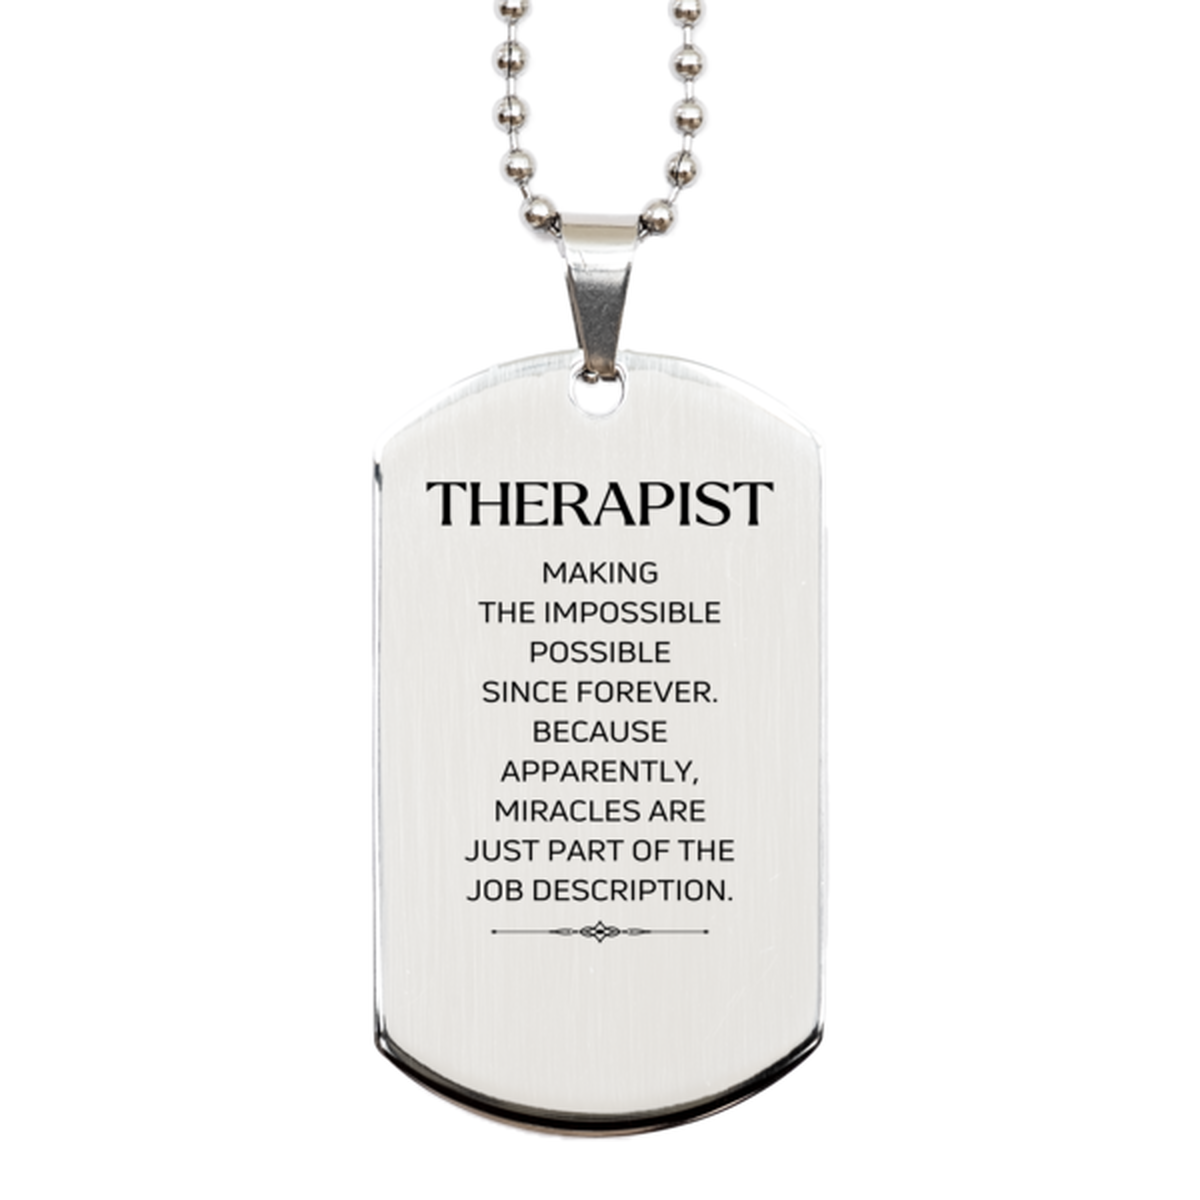 Funny Therapist Gifts, Miracles are just part of the job description, Inspirational Birthday Silver Dog Tag For Therapist, Men, Women, Coworkers, Friends, Boss